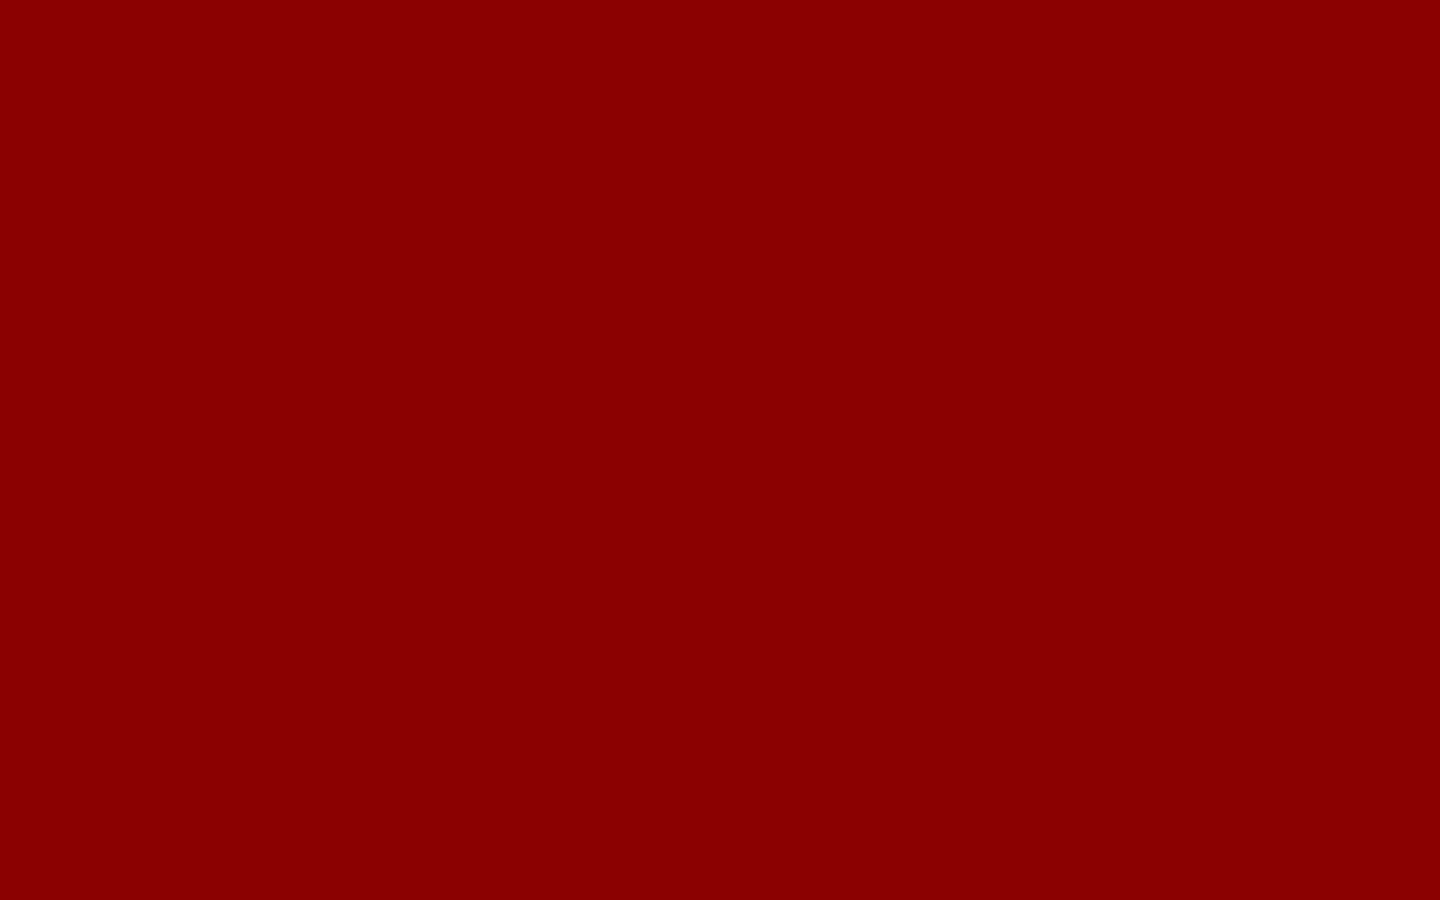 1440x900 Dark Red Solid Color Background